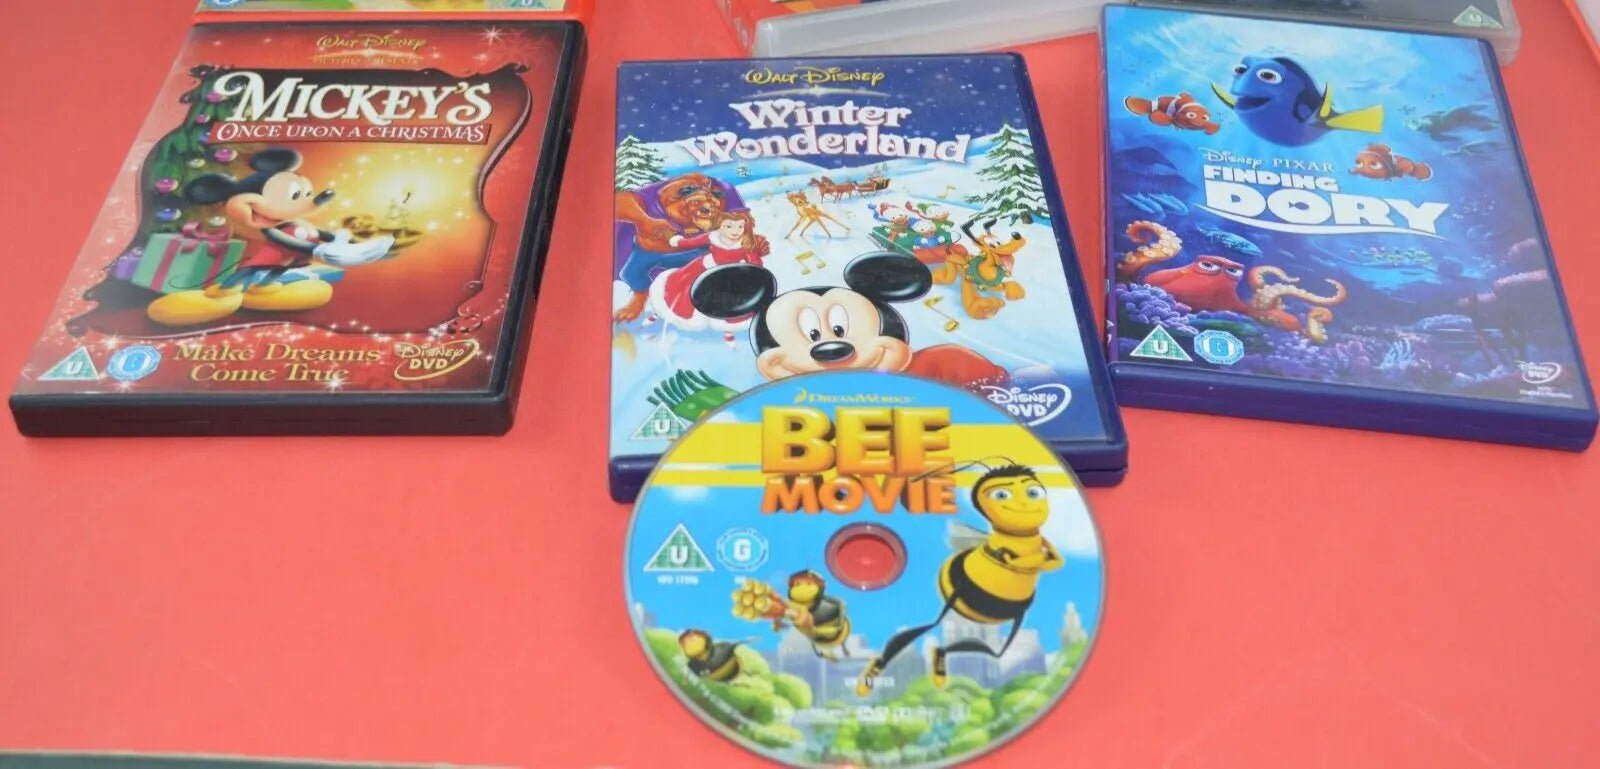 DVDs MICKEY’S ONCE UPON A CHRISTMAS/W.D.WINTER WONDERLAND/FINDING DORY/THE BEE MOVIE - TMD167207